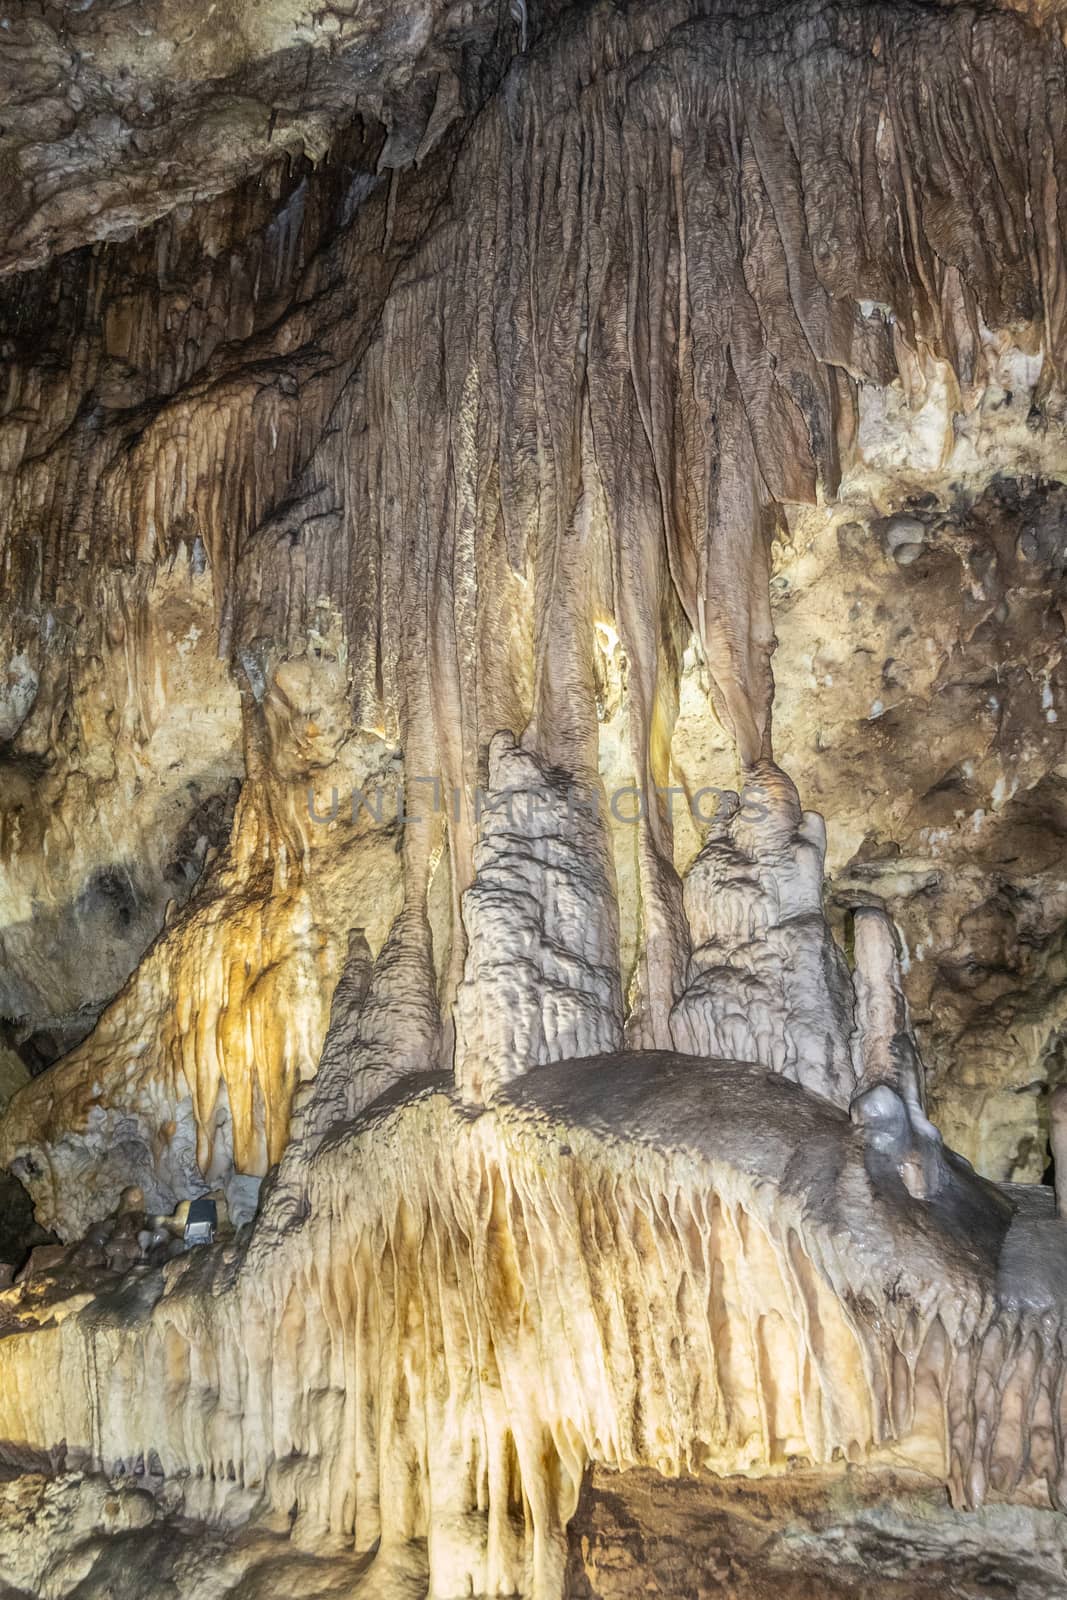 Han-sur-Lesse, Belgium - June 25, 2019: Grottes-de-Han 16 of 36. subterranean pictures of Stalagmites and stalactites in different shapes and colors throughout tunnels, caverns and large halls. Rock curtains.